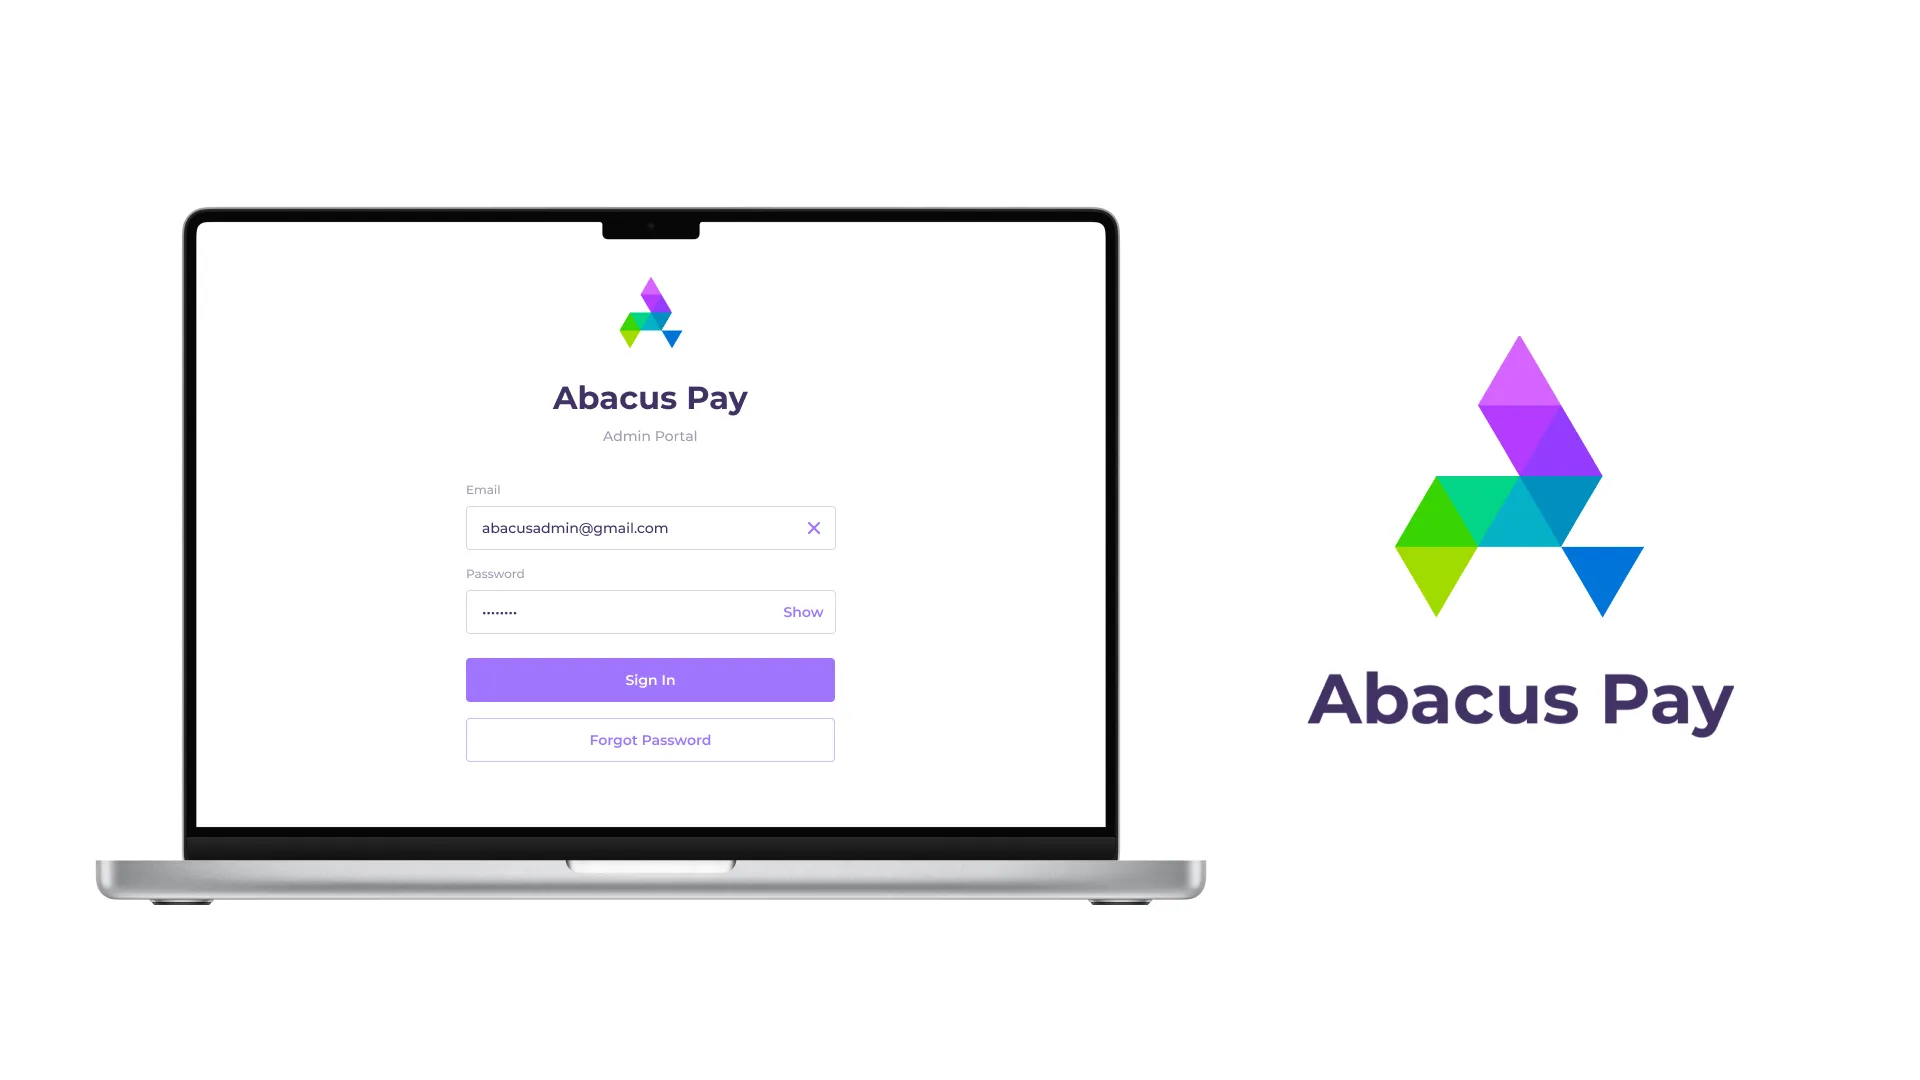 Abacus Pay